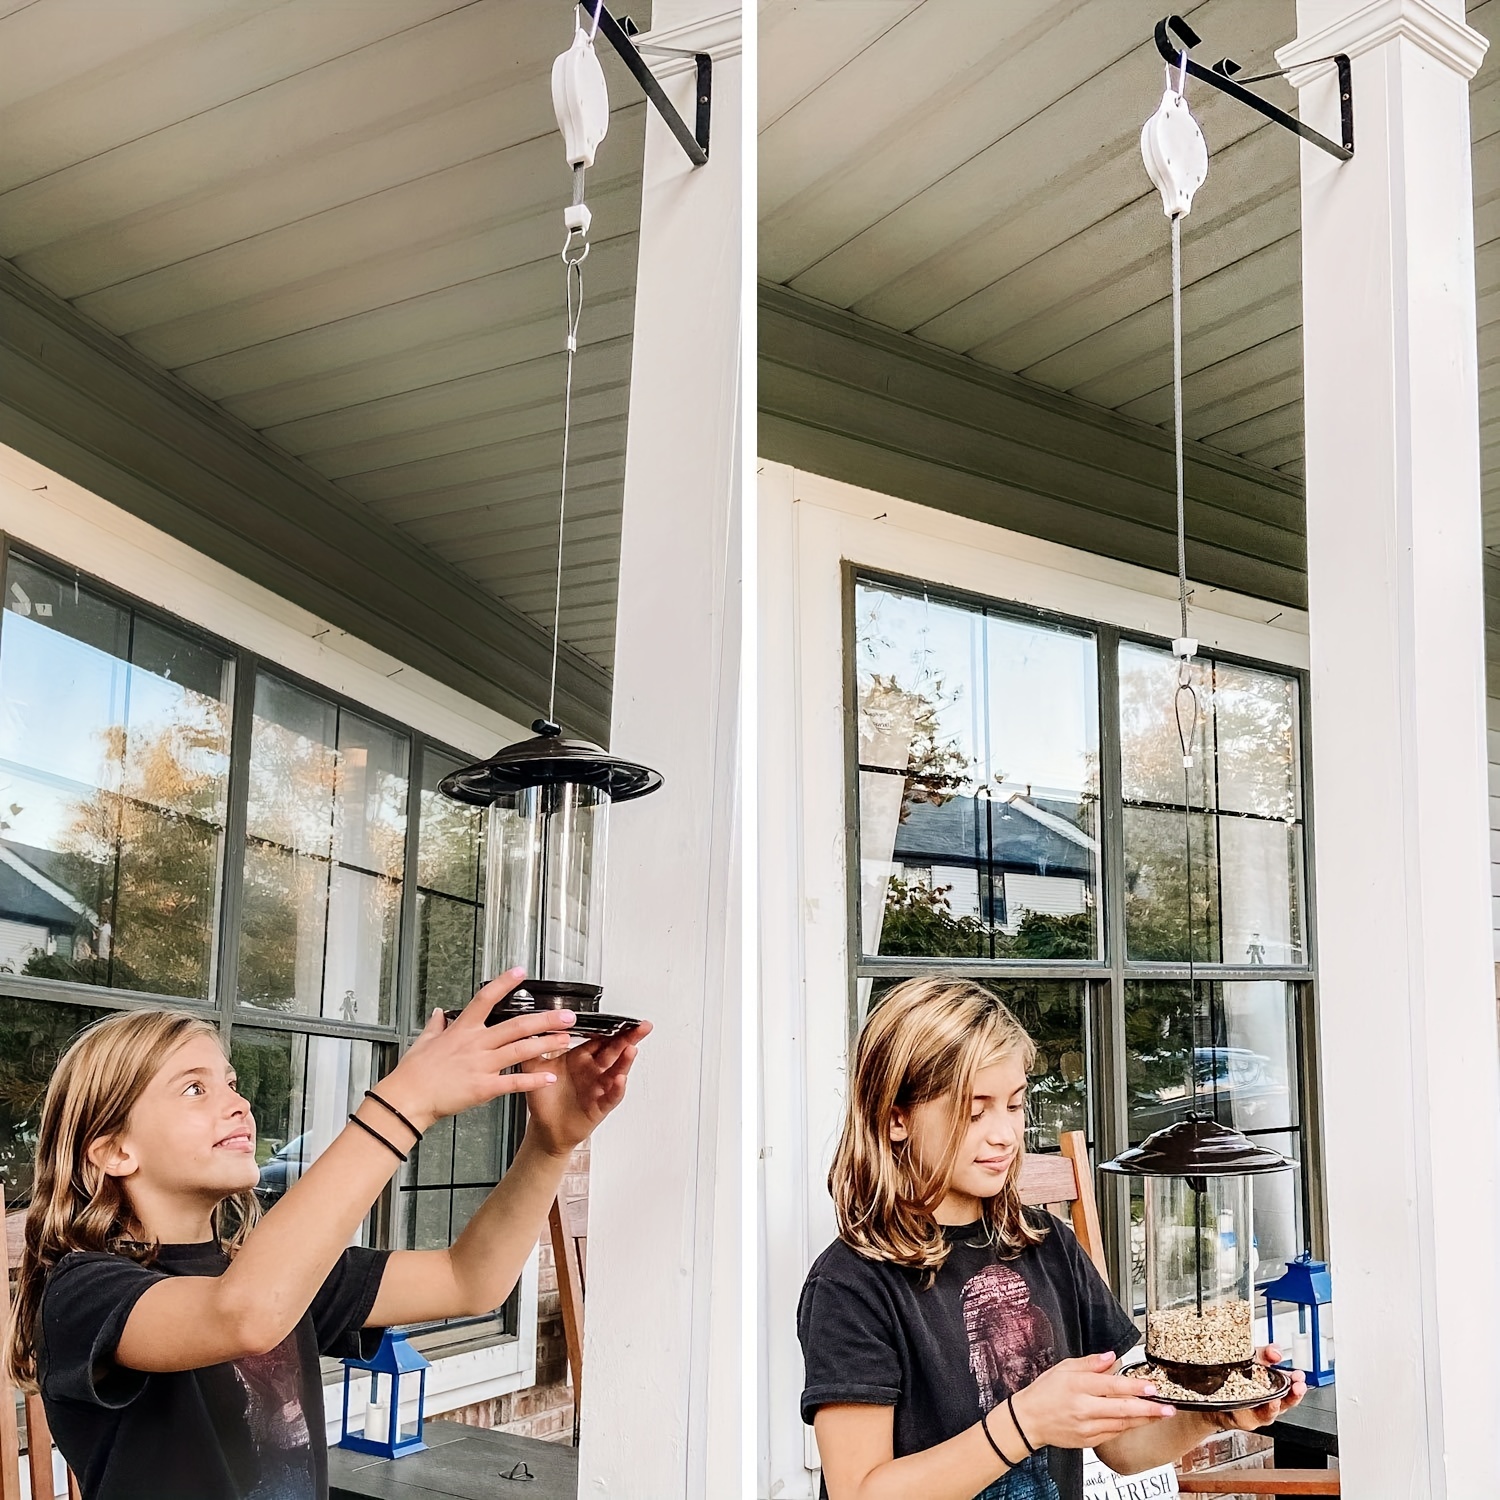 Upgraded Retractable Plant Hanger,Plant Pulleys for Hanging Plants,Easy to  Raise and Lower,Auto Lock,Heavy Duty,Adjustable Hook for Garden Baskets